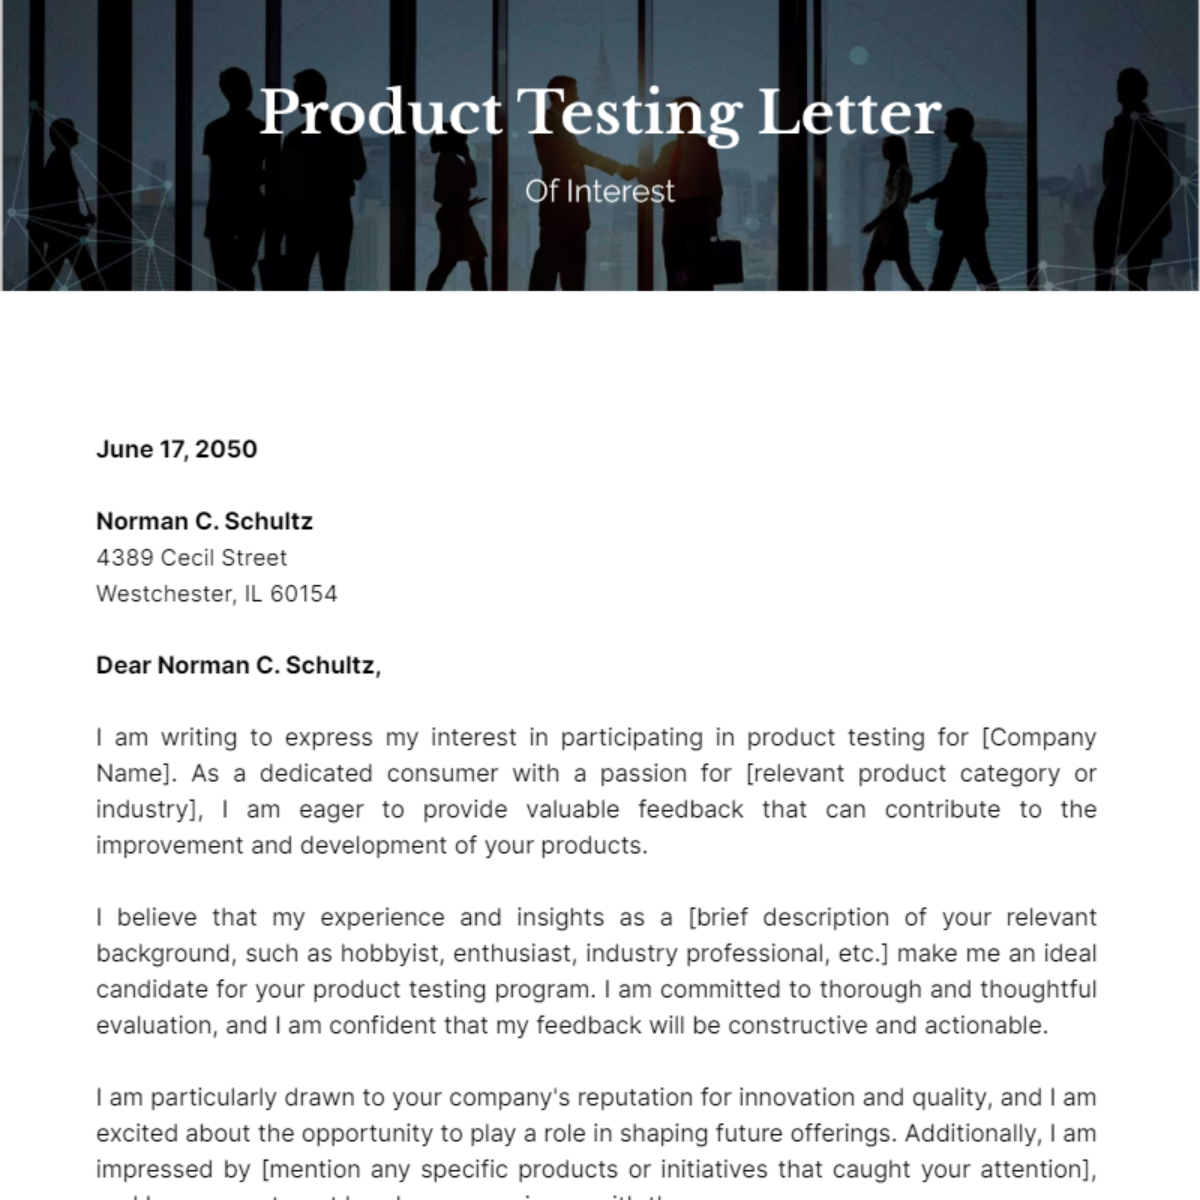 Product Testing Letter of Interest Template